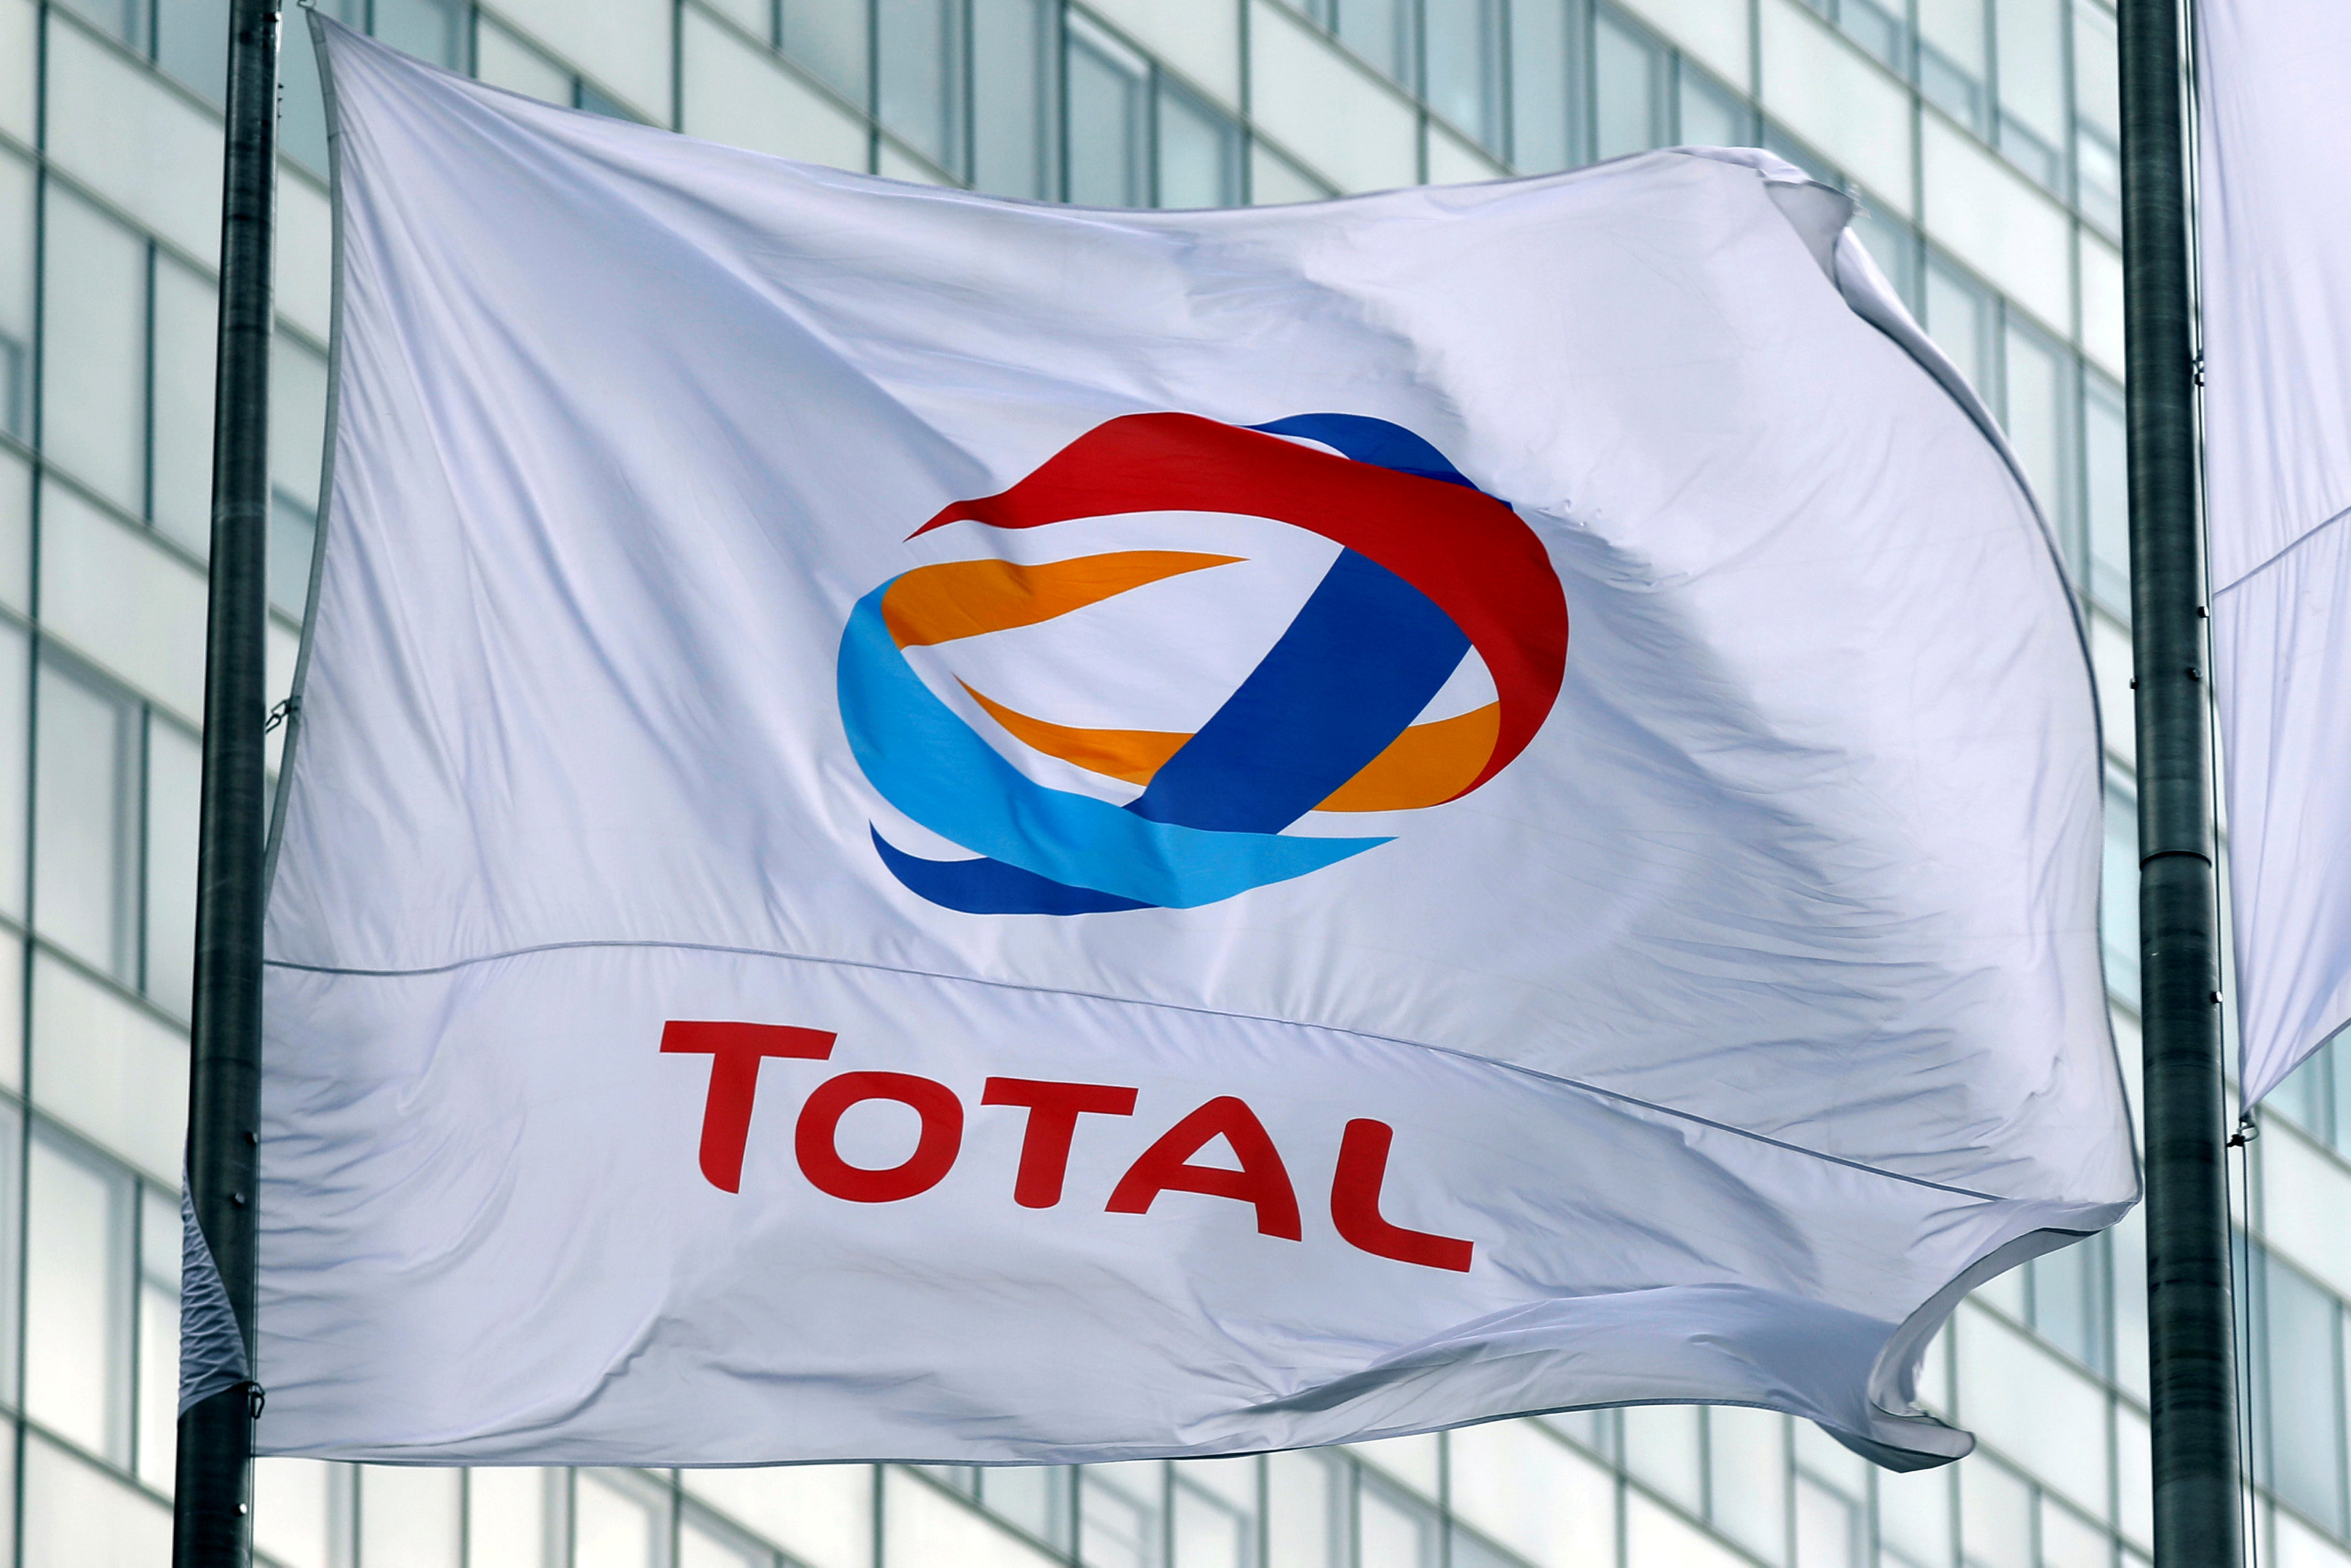 Total has two months to seek US sanctions exemption, says Iran